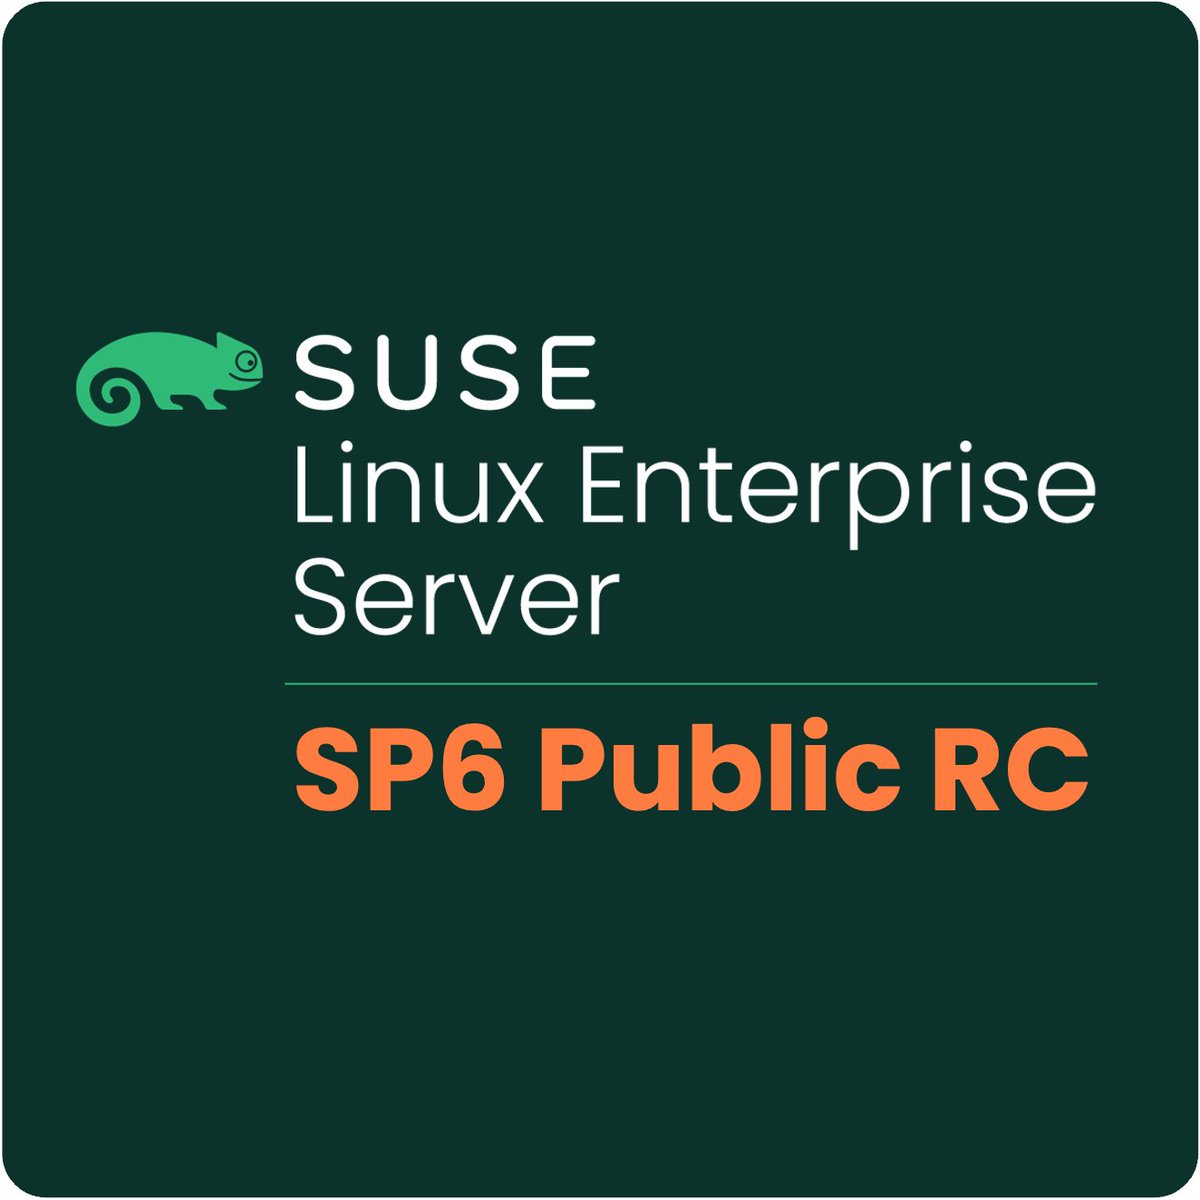 #SLES 15 SP6 Public Release Candidate is now available, representing a comprehensive refresh of @SUSE flagship suite of enterprise products and extensions, including those for #SAP, #HighAvailability, #HighPerformanceComputing, and #Linux-based desktops.👉okt.to/n6dO9C